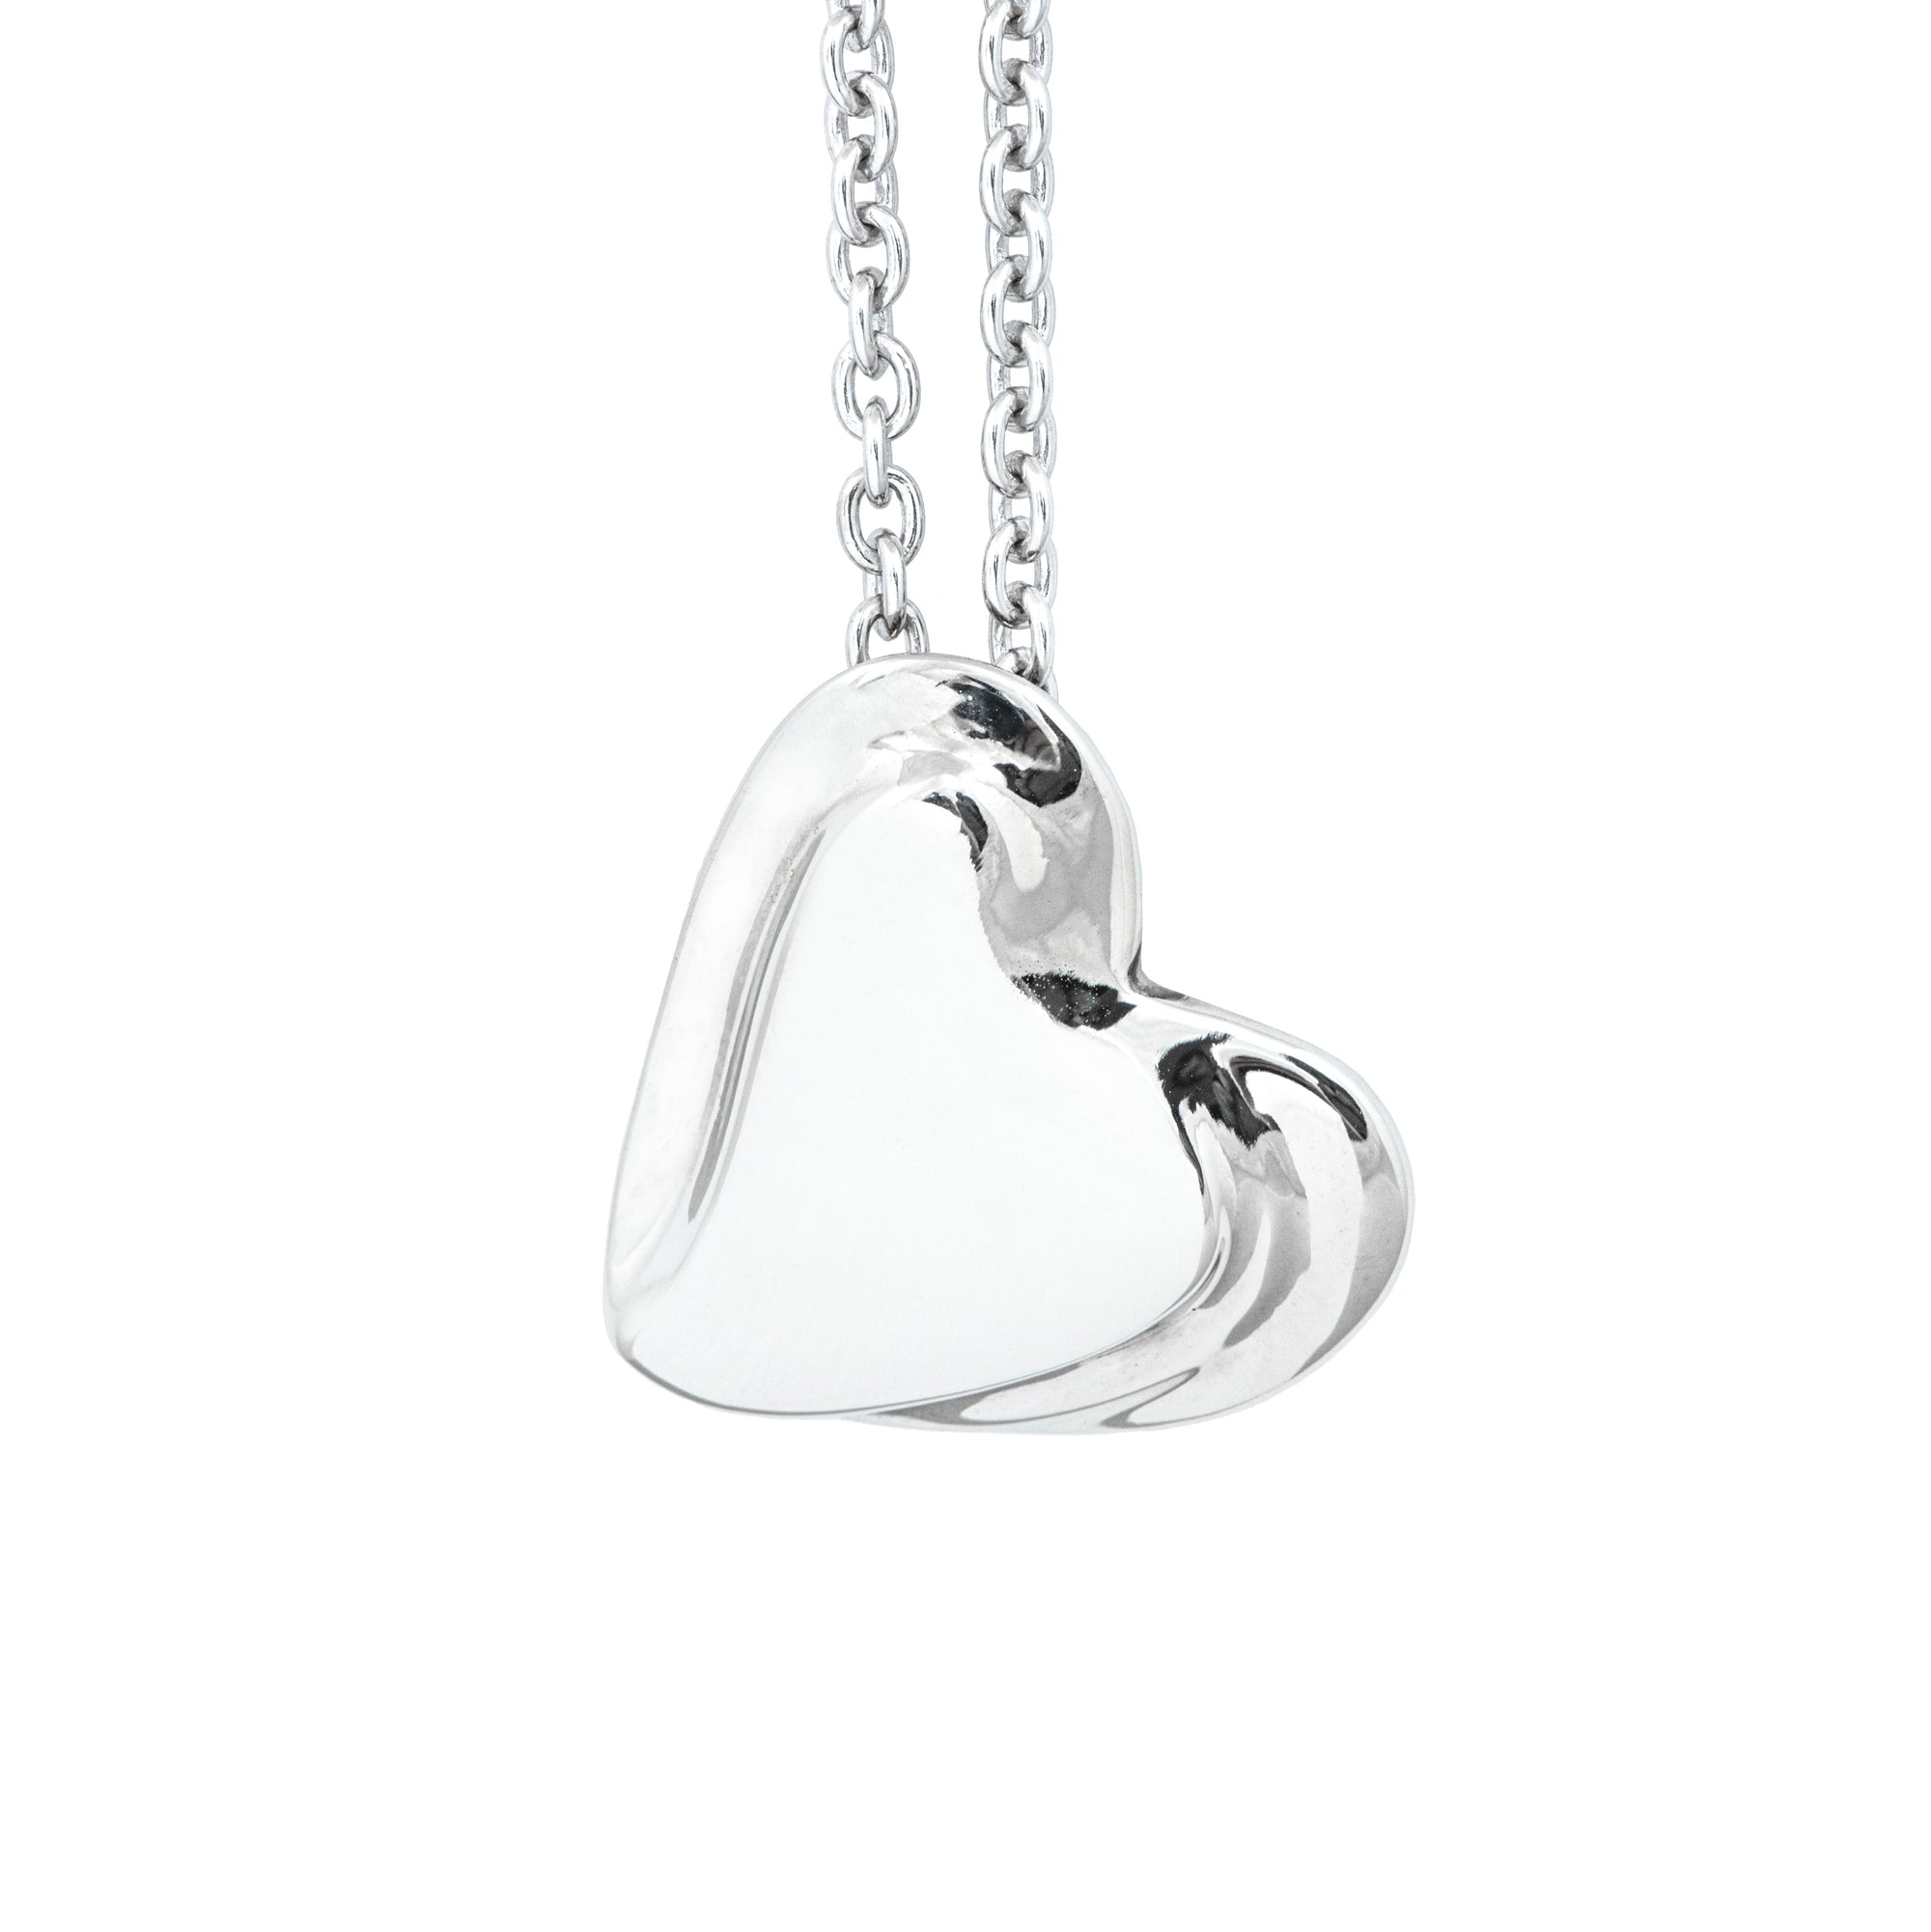 Silver Heart Pendant "Rays of Love"